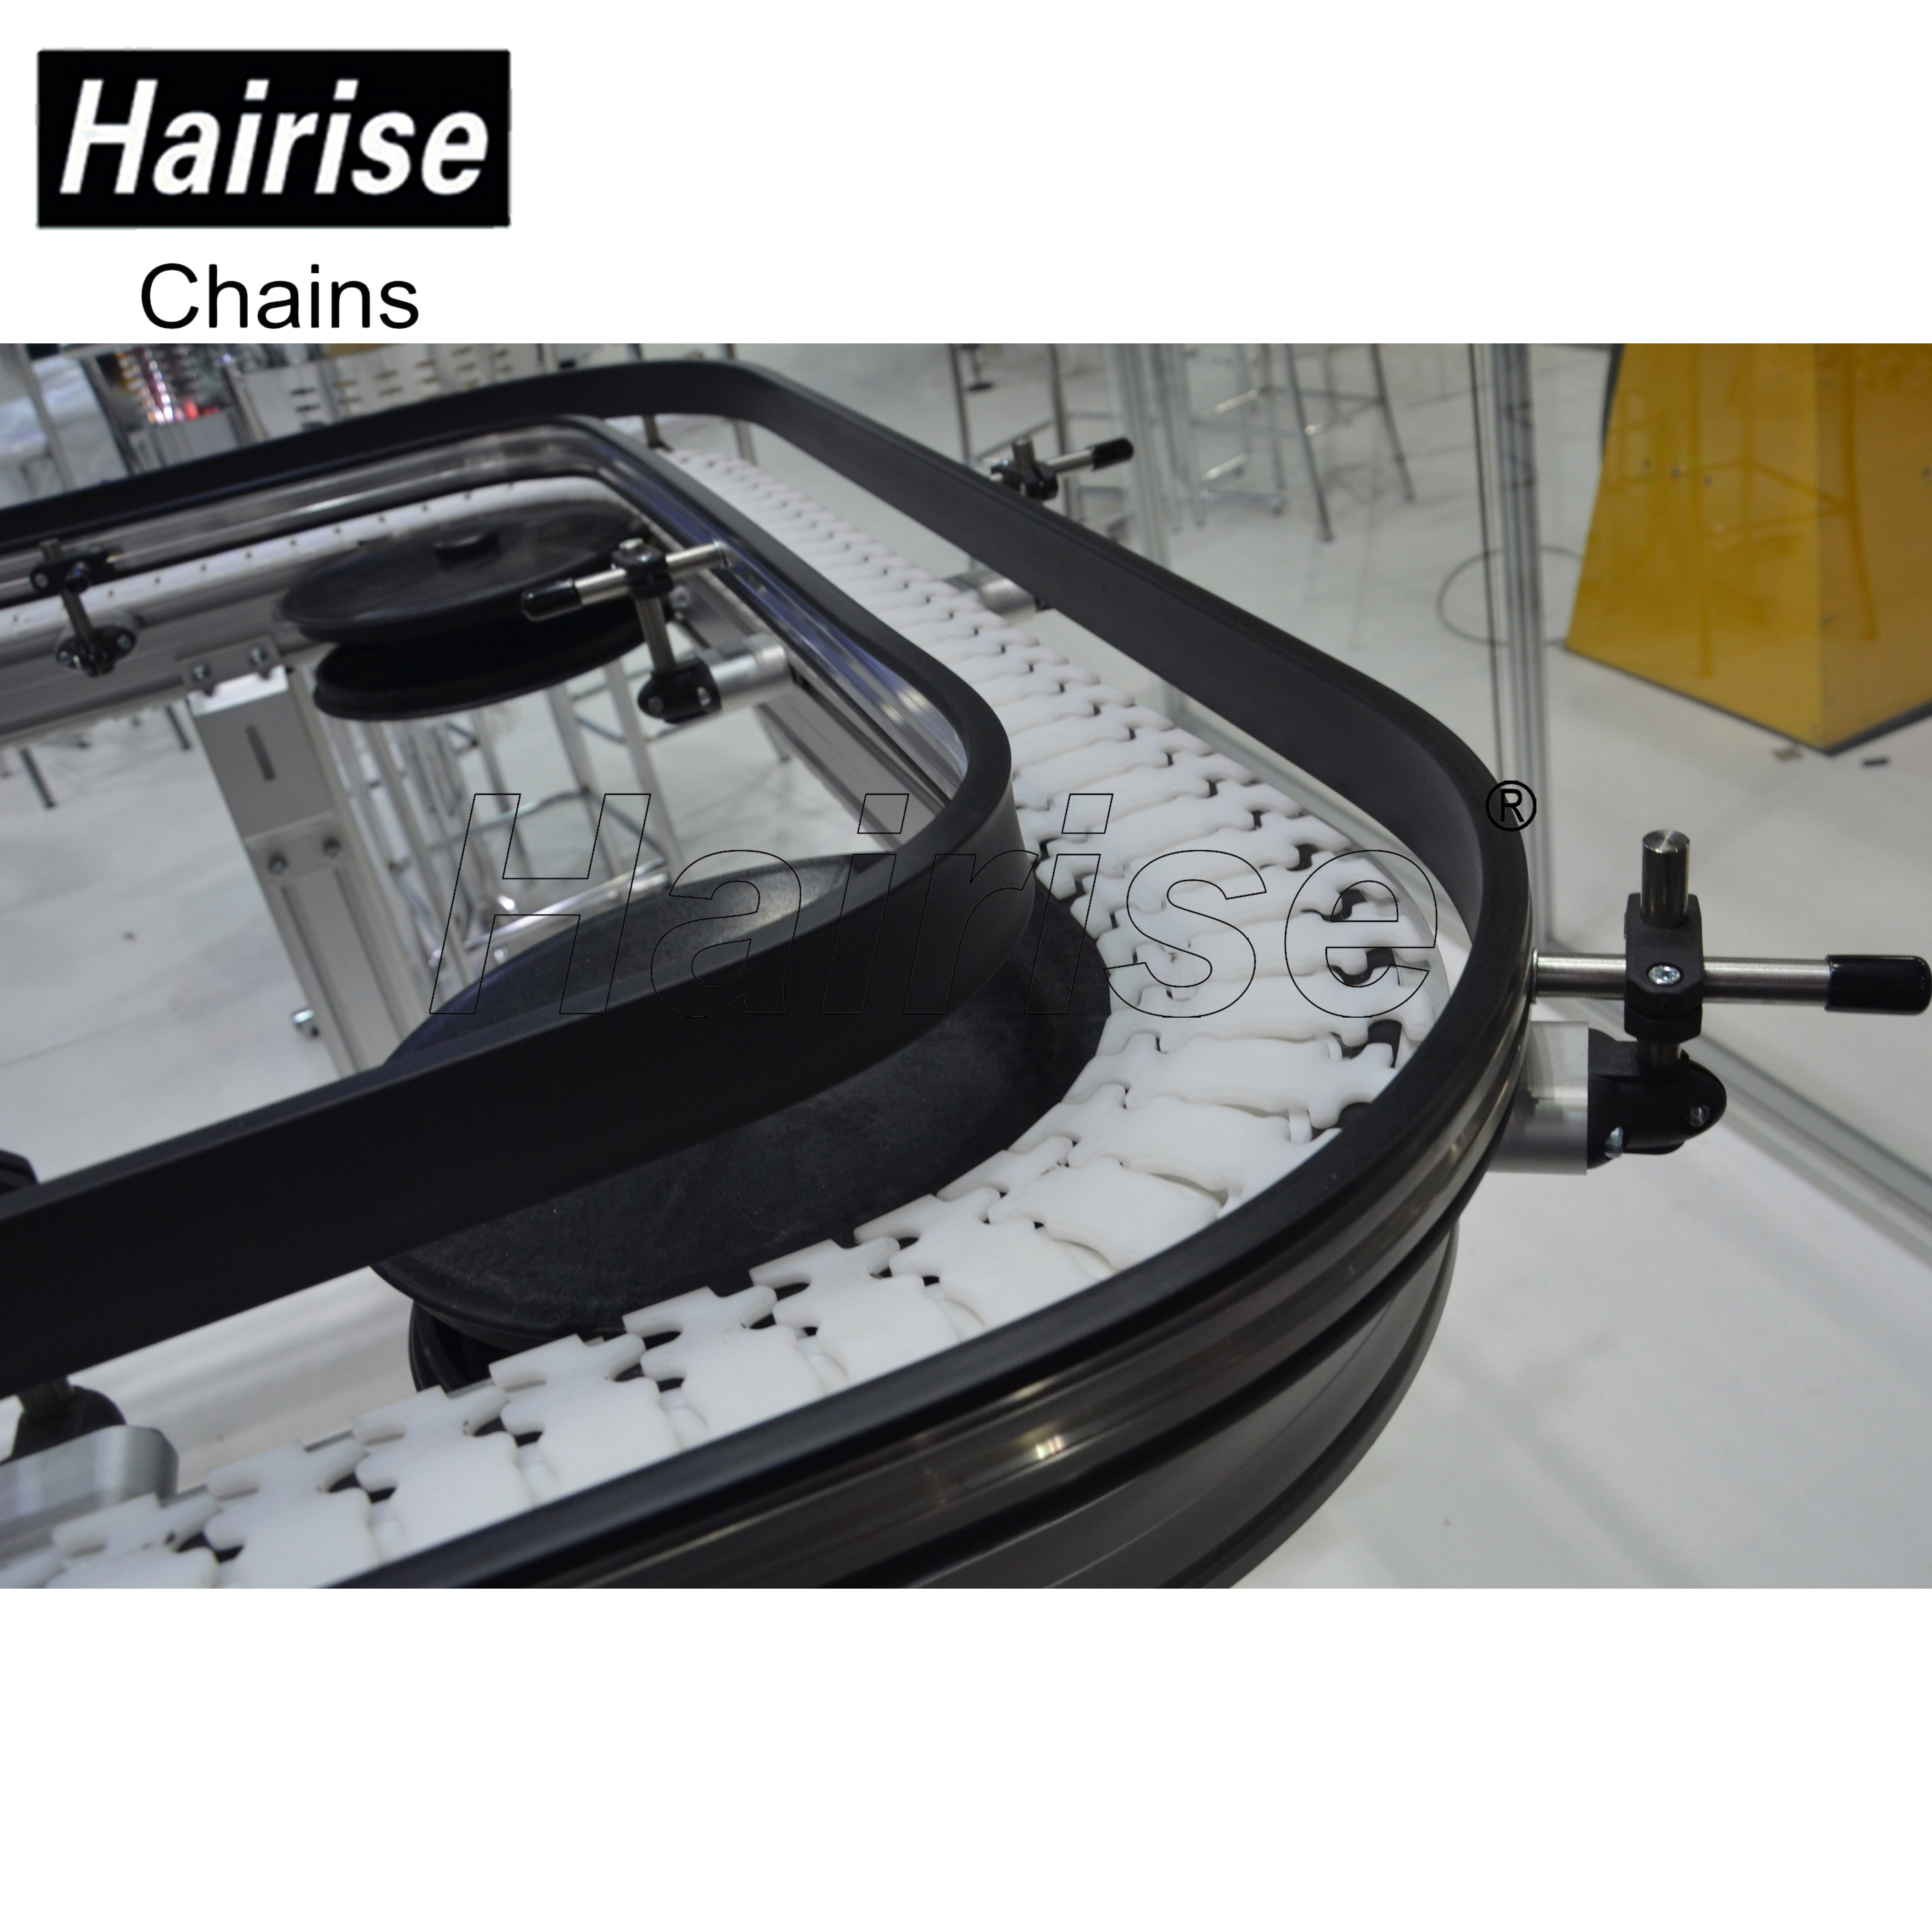 Hairise Curved Conveyors with Multiflex Chains